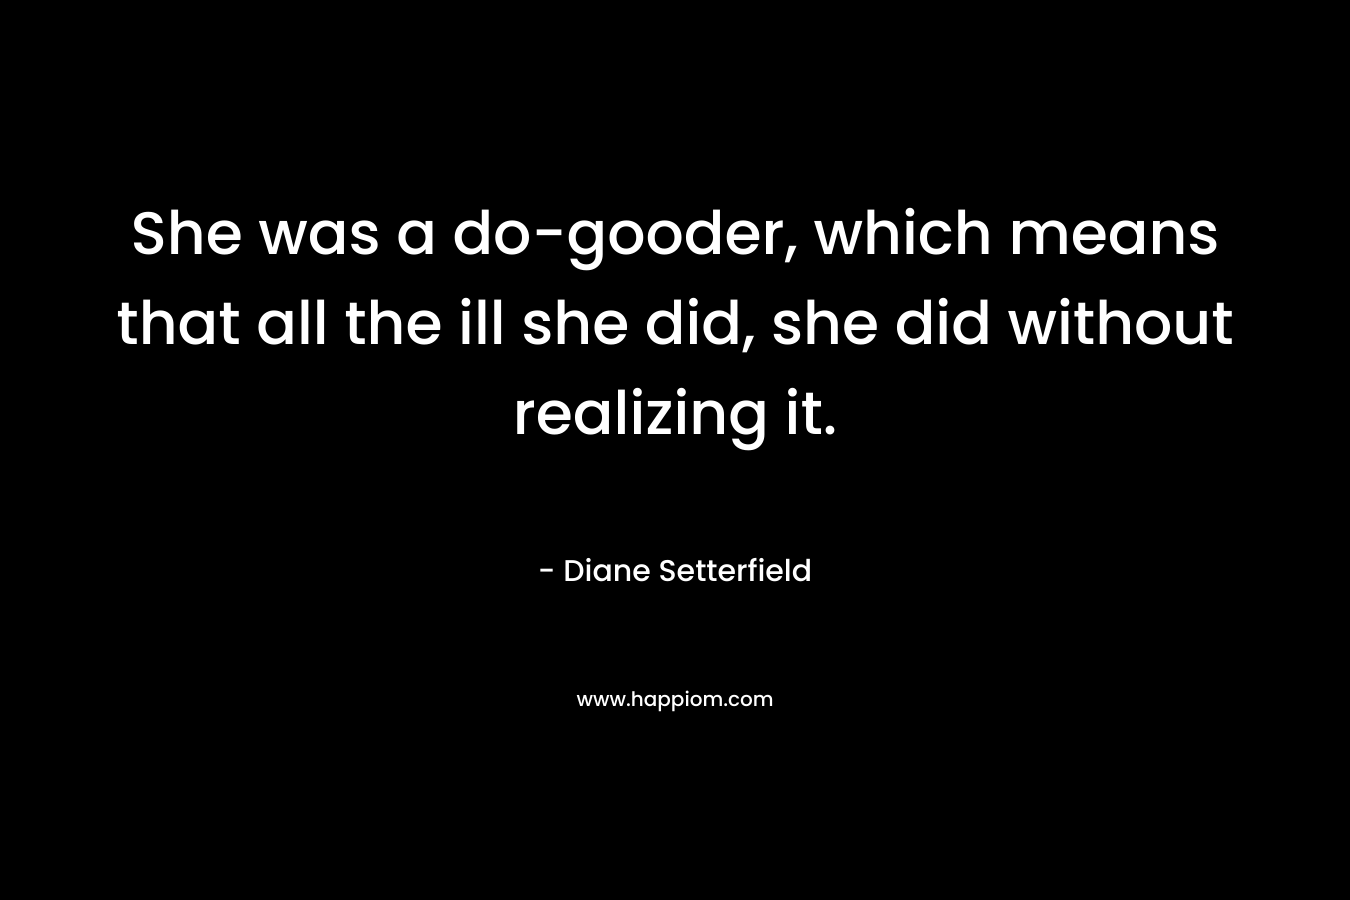 She was a do-gooder, which means that all the ill she did, she did without realizing it.